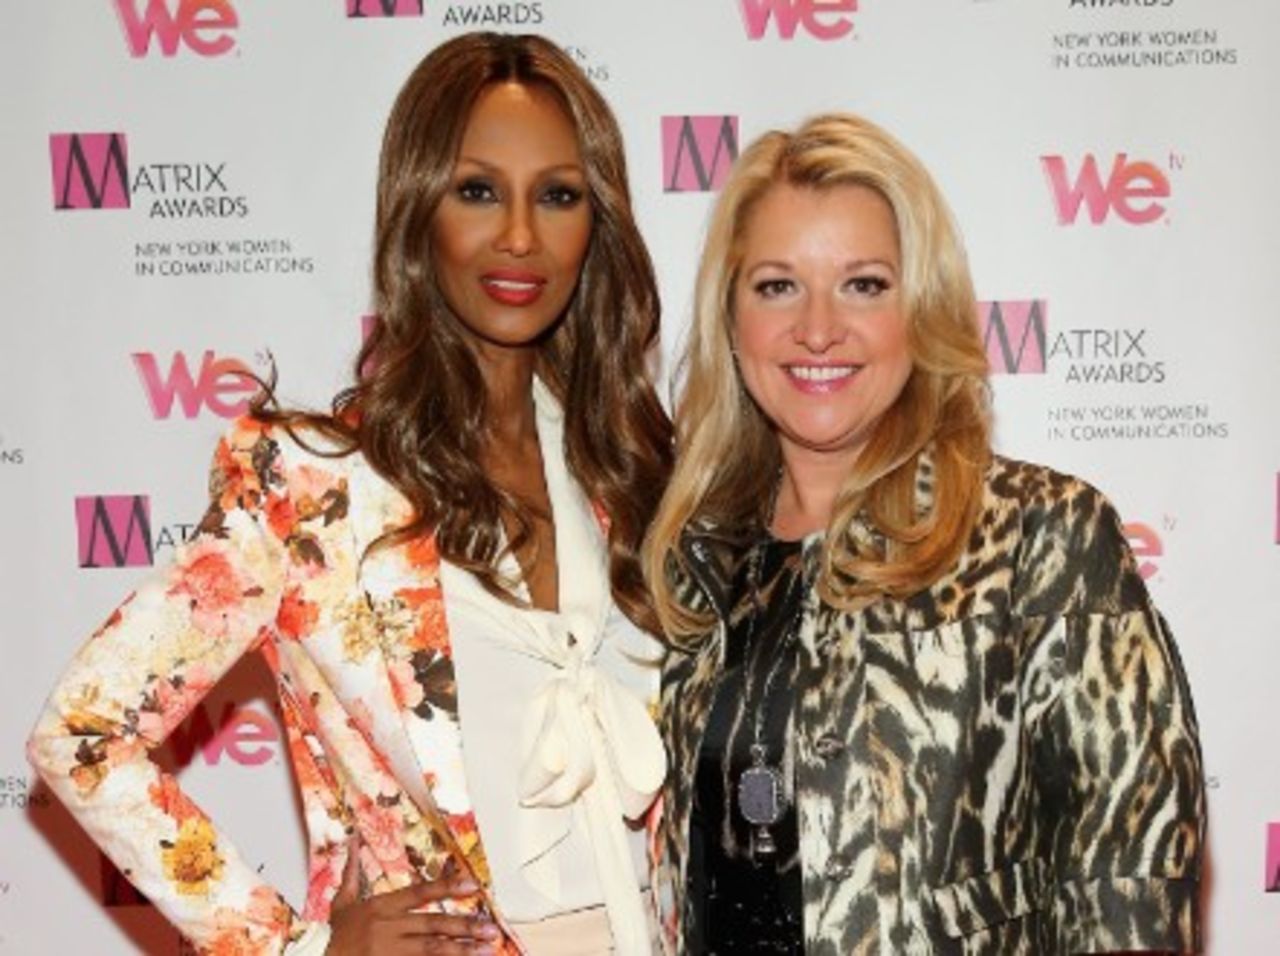 Grossman believes in the power of celebrity. Here she is with model Iman at the New York Women In Communications Awards in 2013.